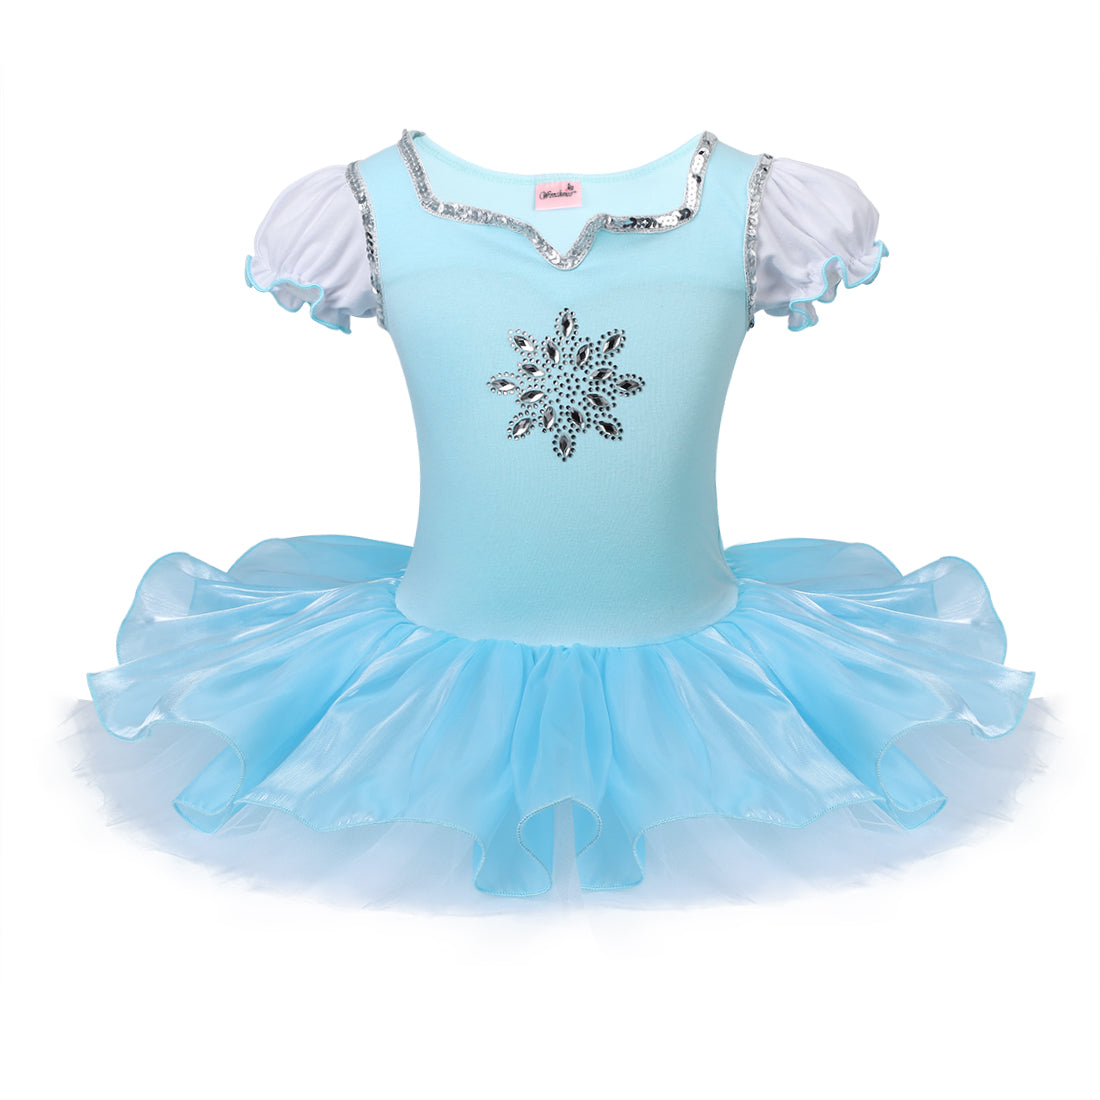 Baby Blue Snowflake Sequin Ballet Dress | Wenchoice